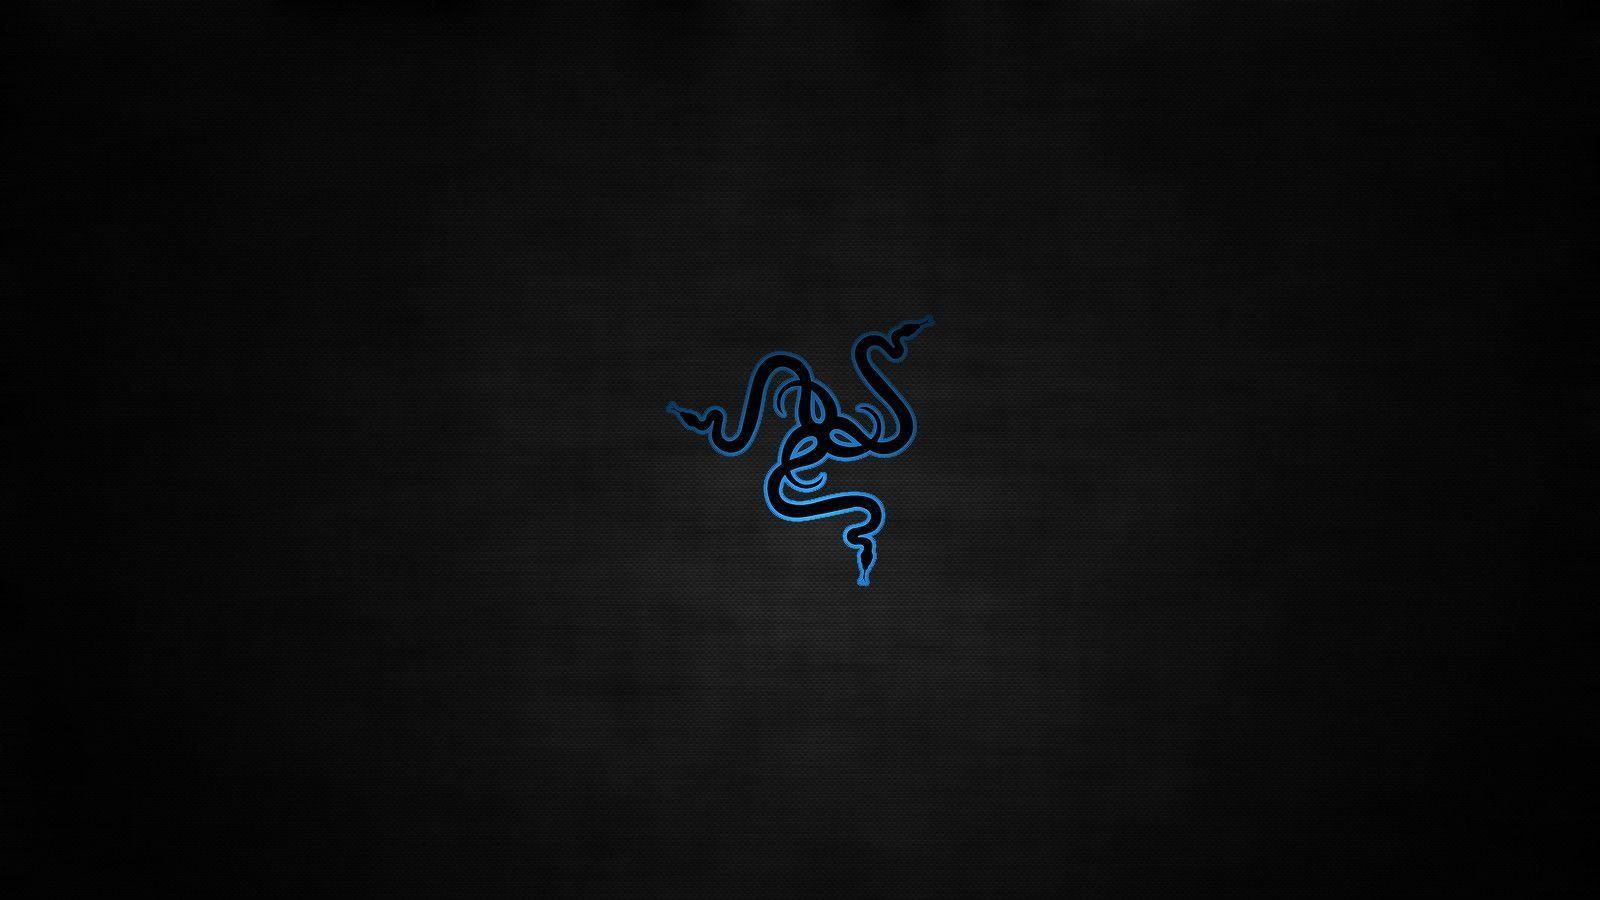 Wallpapers For > Razer Wallpapers 1920x1200